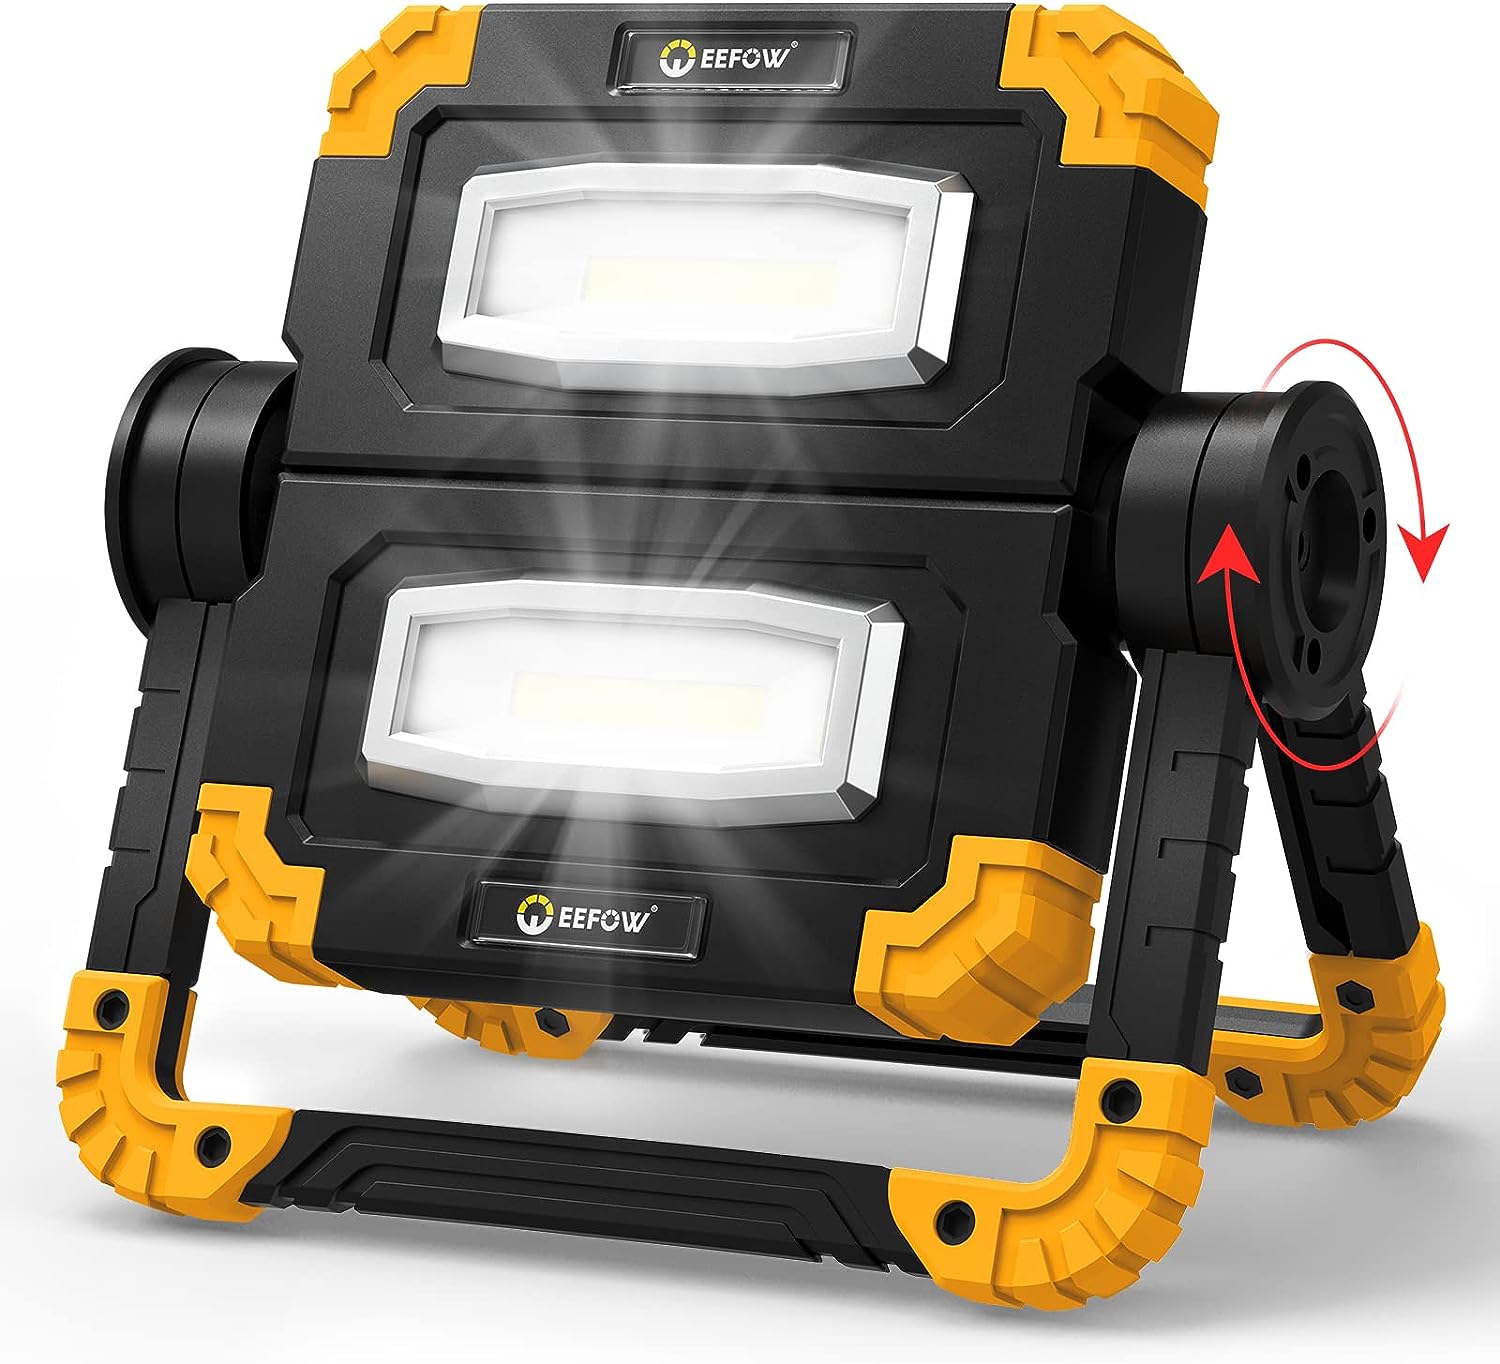 EEFOW LED Work Light Rechargeable Portable - [...]